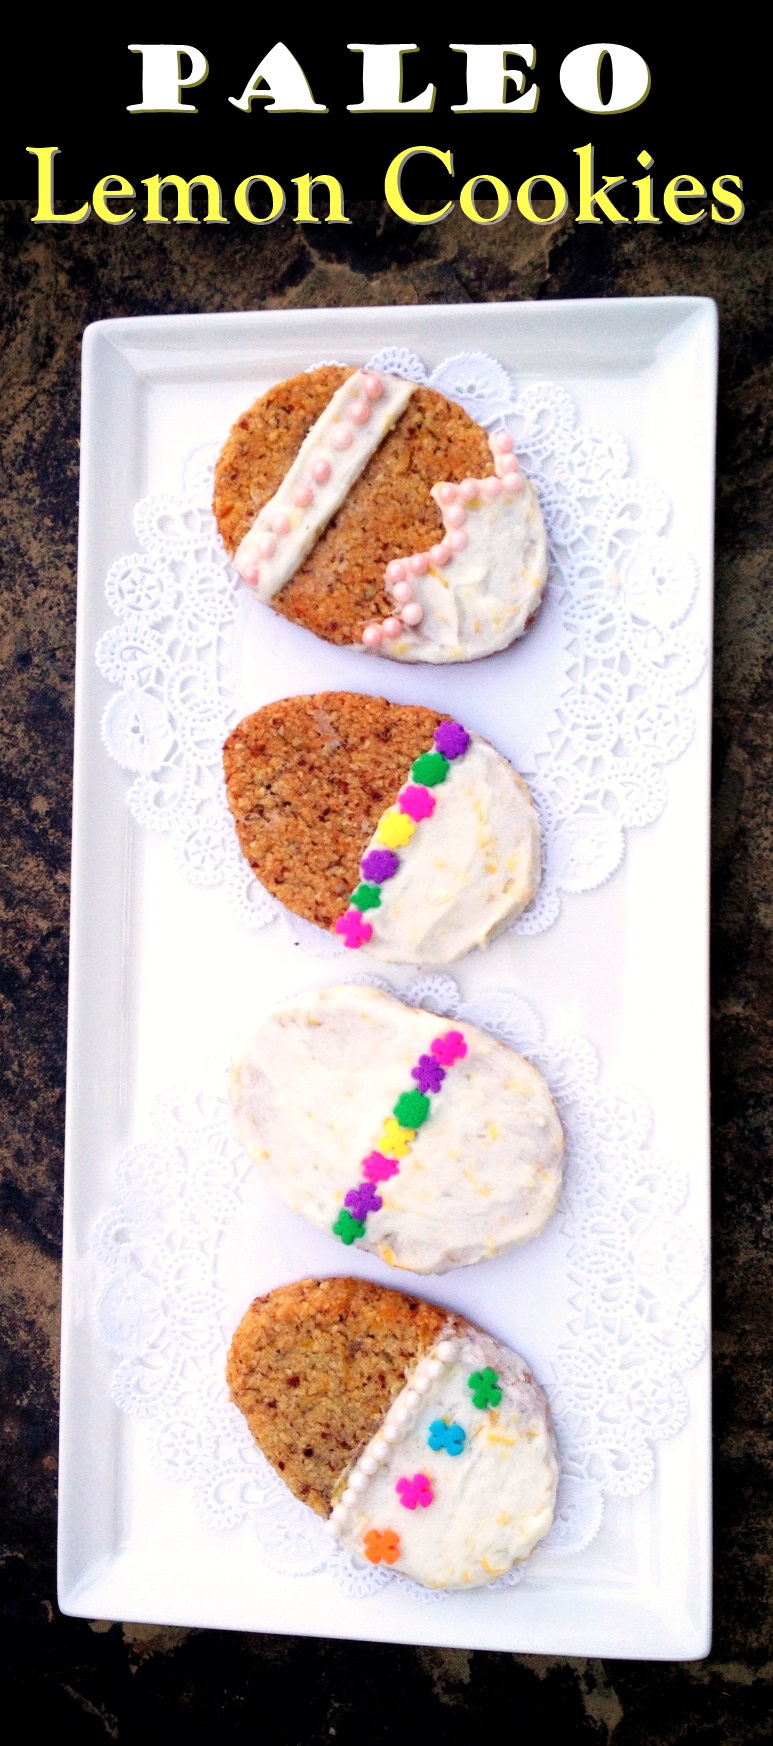 Zesty Paleo Lemon Cookies Recipe with Lemon Frosting (great for Easter!)